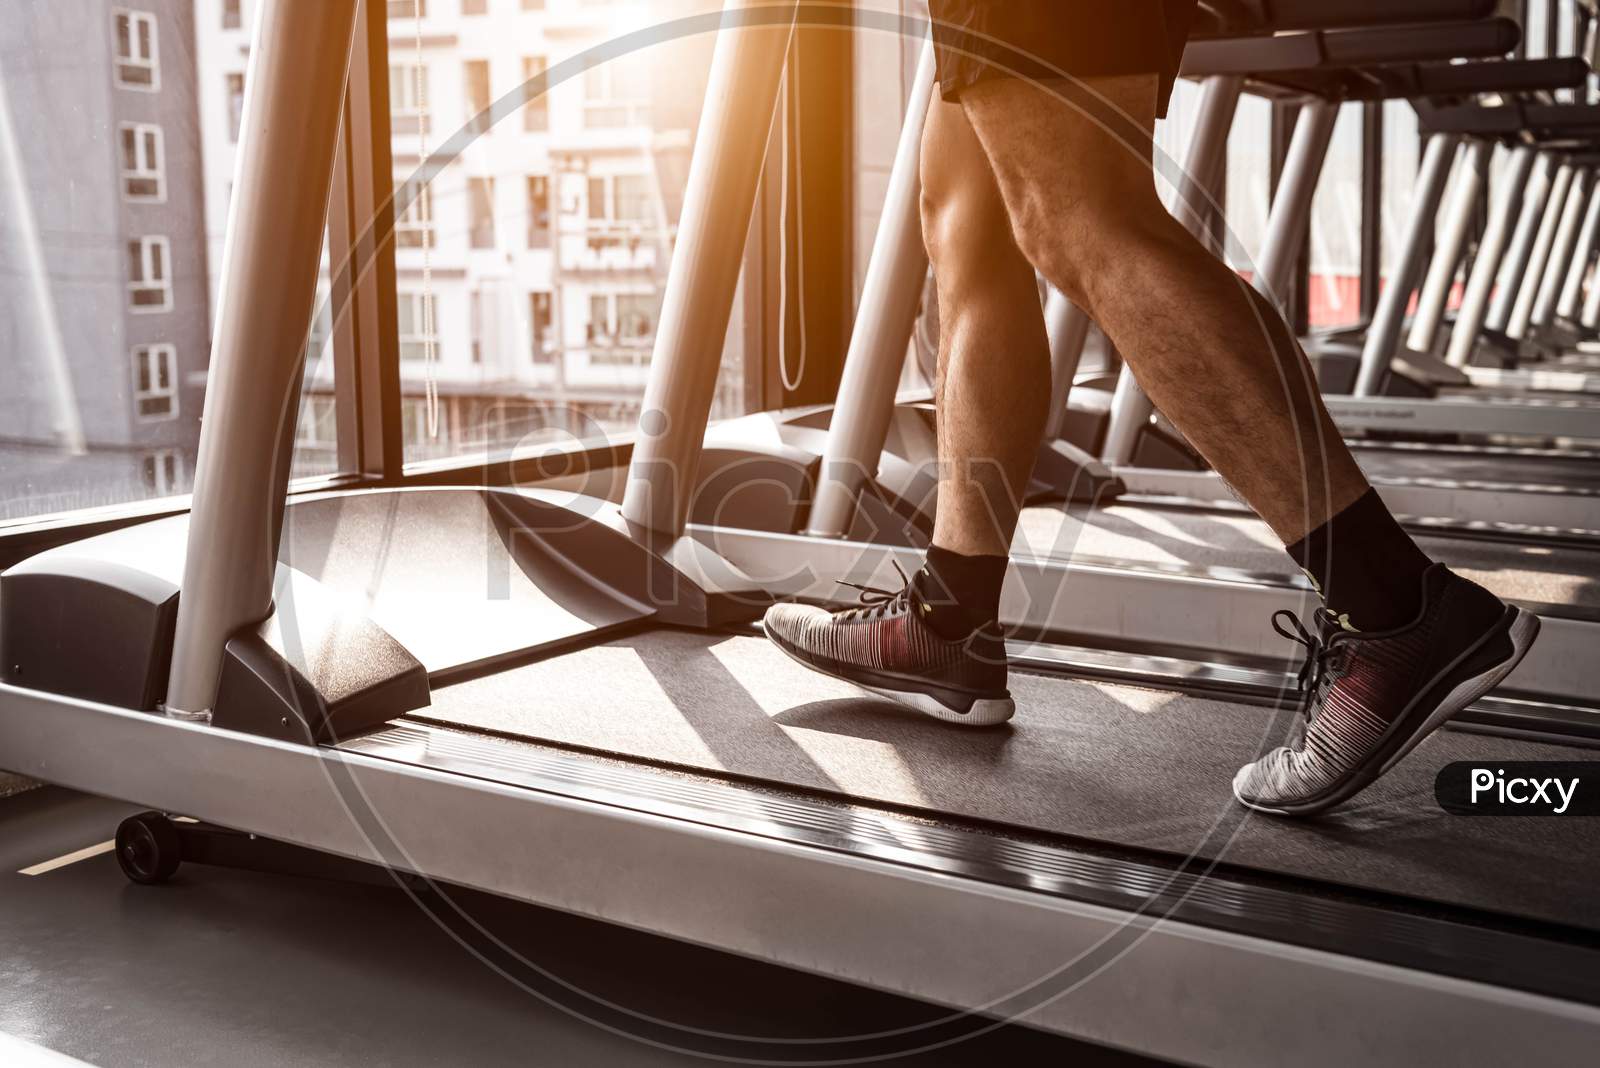 Close Up Of Sport Man Running On Treadmill In Fitness Gym At Condominium In Urban. People Lifestyles And Sport Activity Concept.